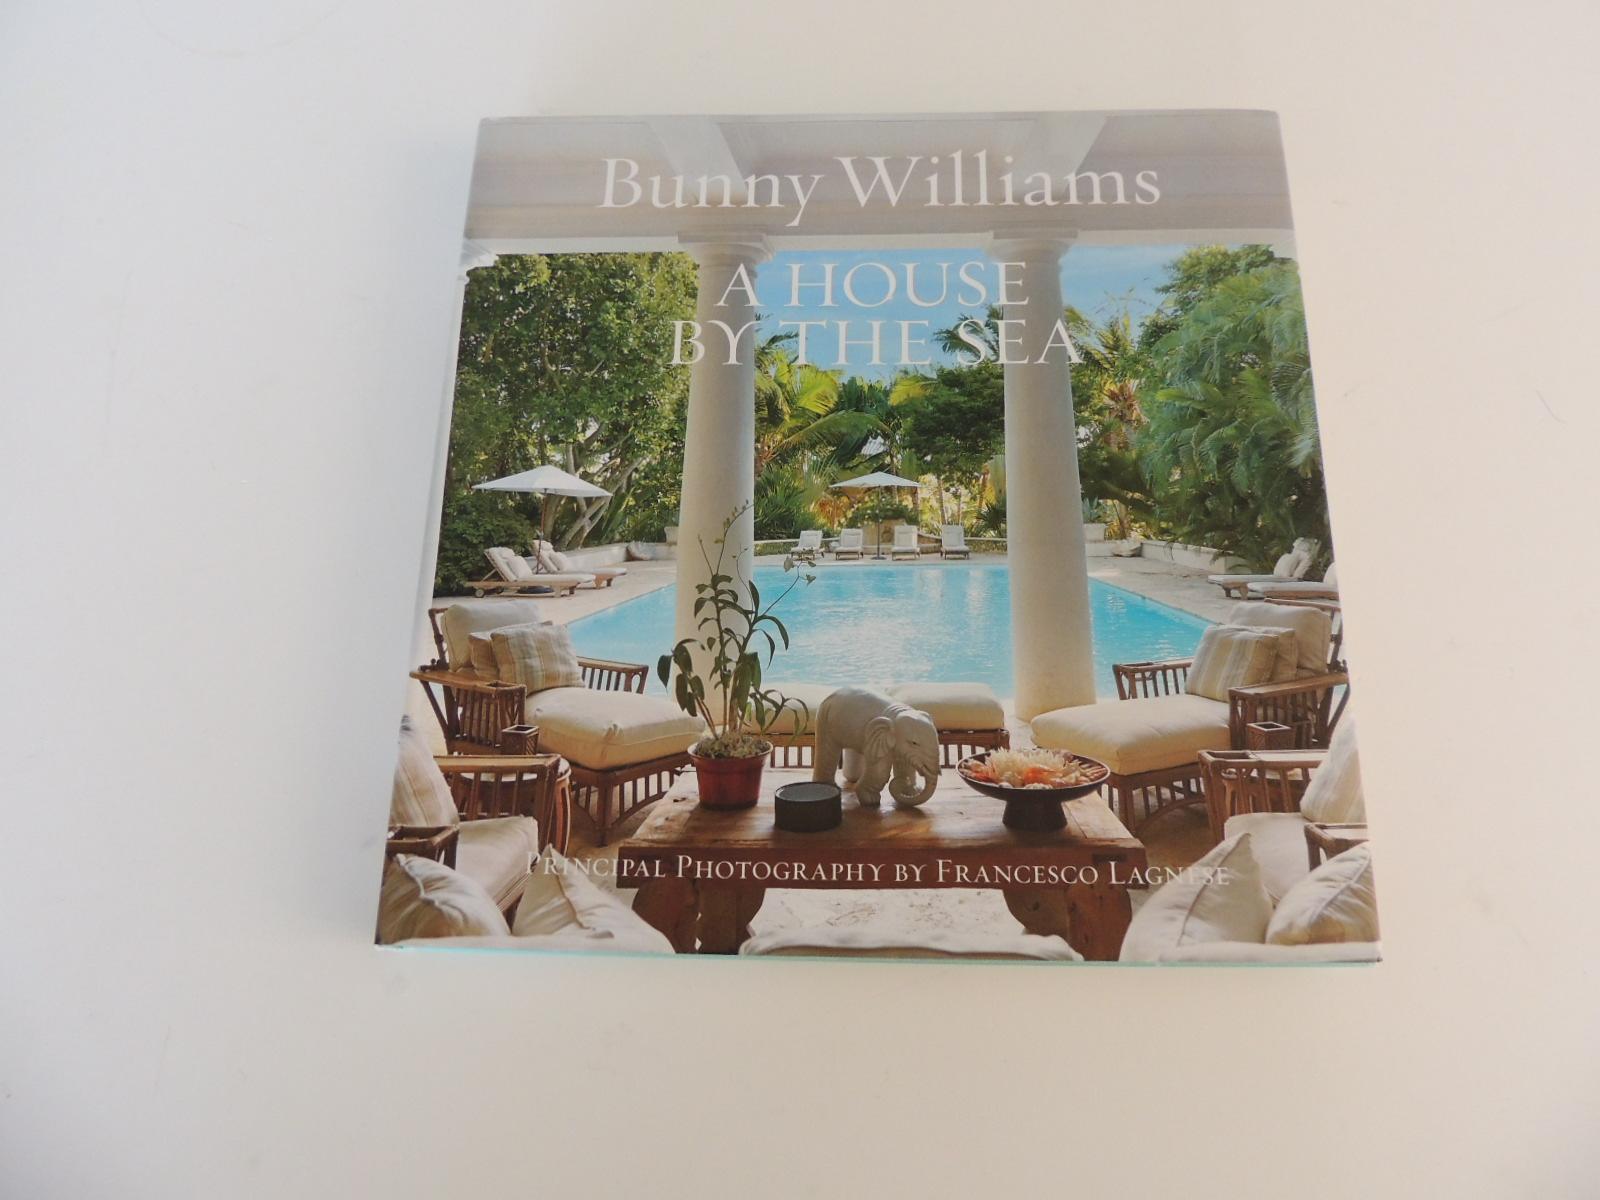 A House by the Sea Hardcover – Illustrated, September 13, 2016
Author and renowned designer Bunny Williams has been at the top of the interior design world for more than 40 years. Her new book invites readers to explore La Colina, Williams’s lovely